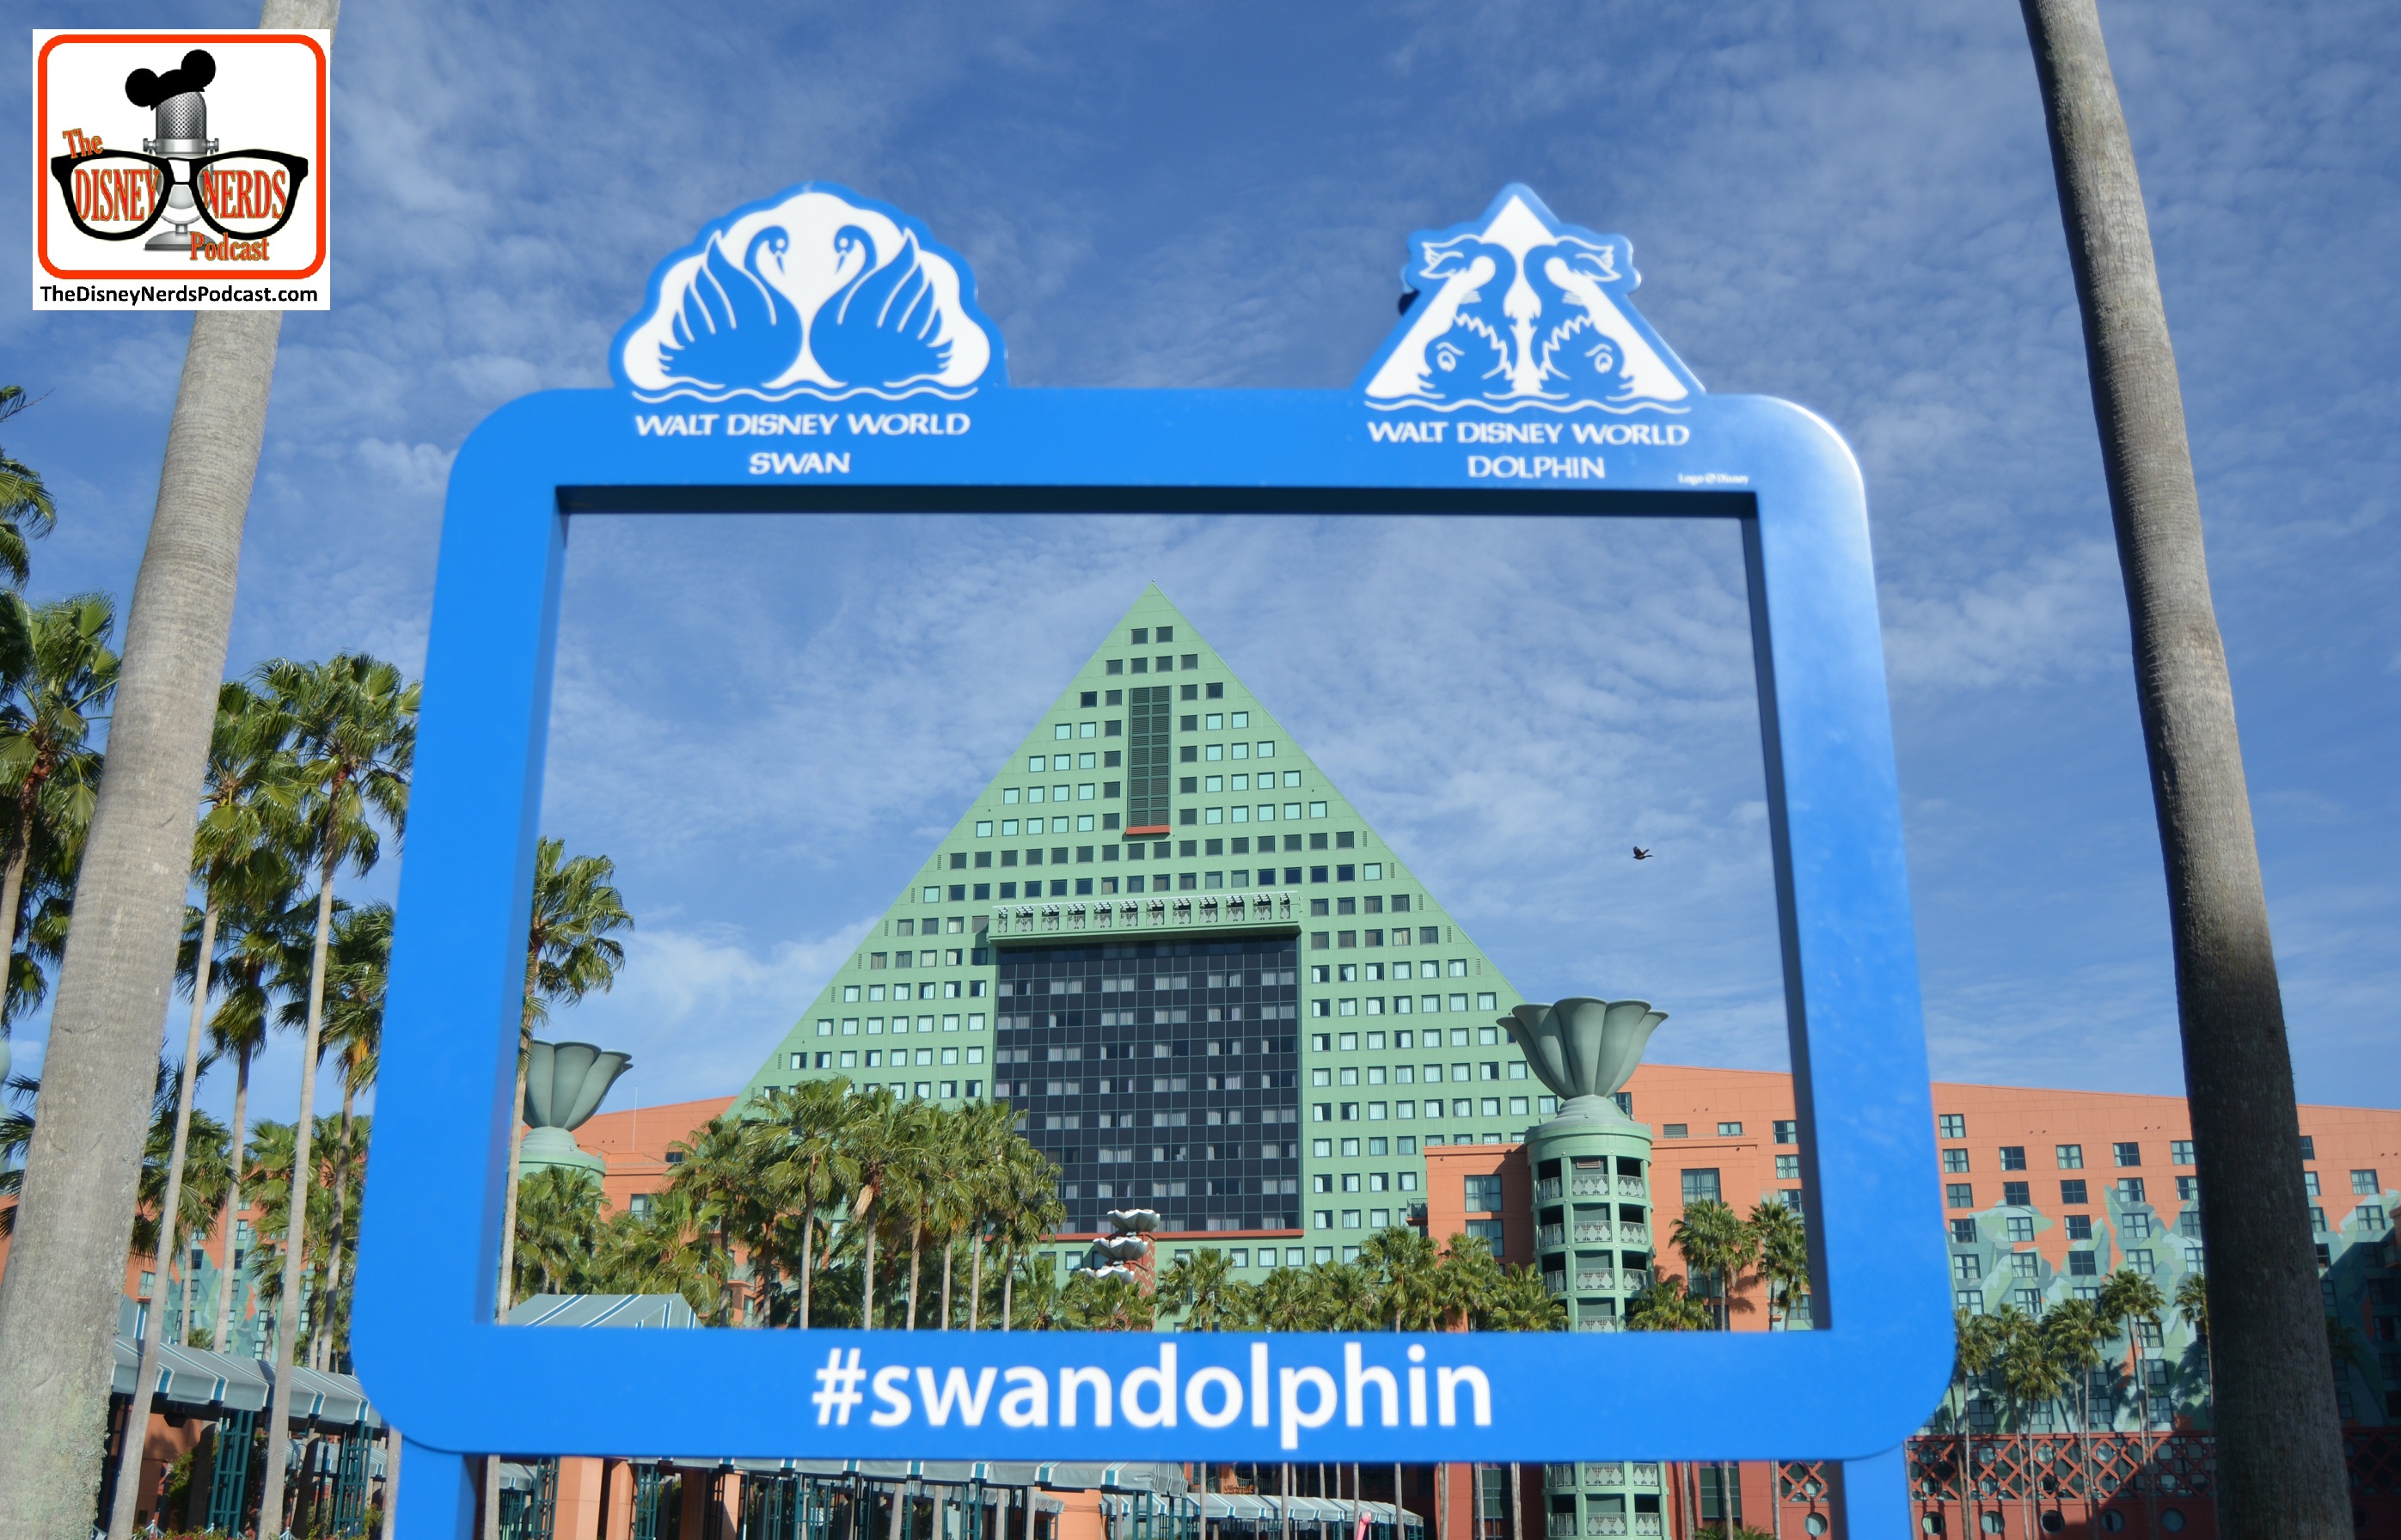 DNP April 2016 Photo Report: new "Frame" photo op at the Swan and Dolphin #SwanDolphin